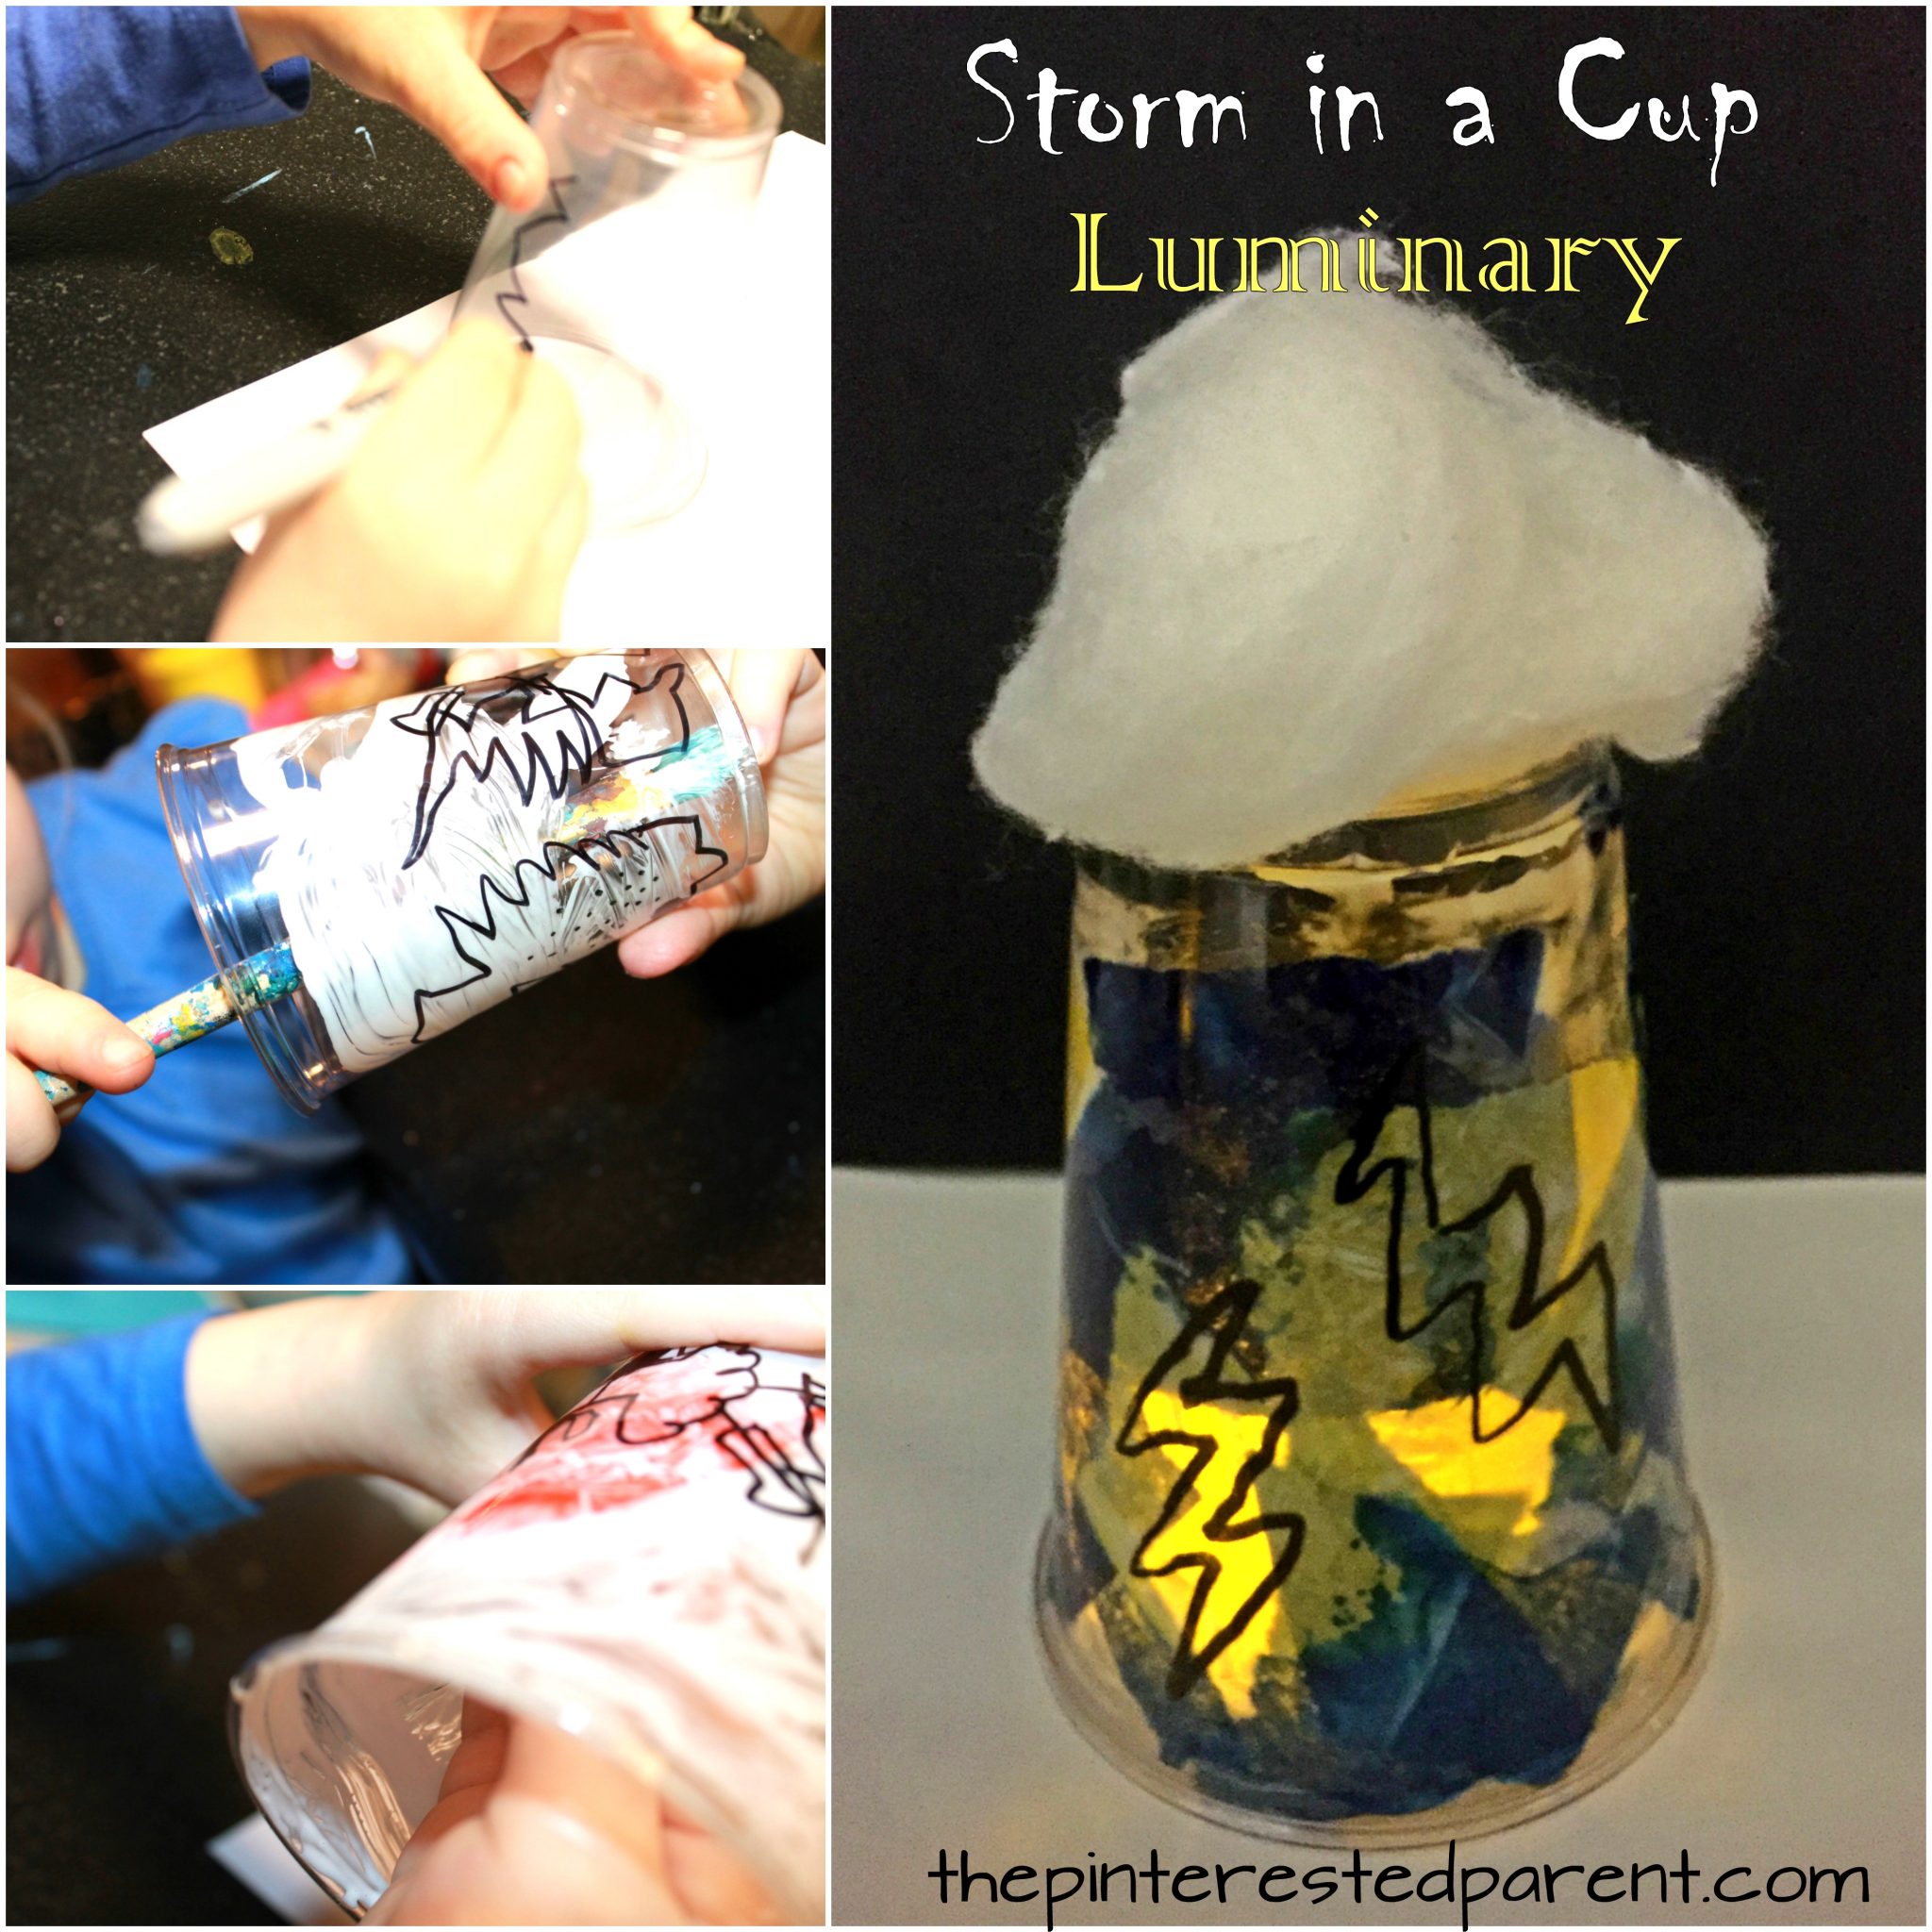 Plastic cup storm luminary. Weather, lightning and rain arts and crafts for kids. Spring projects for preschoolers and kids